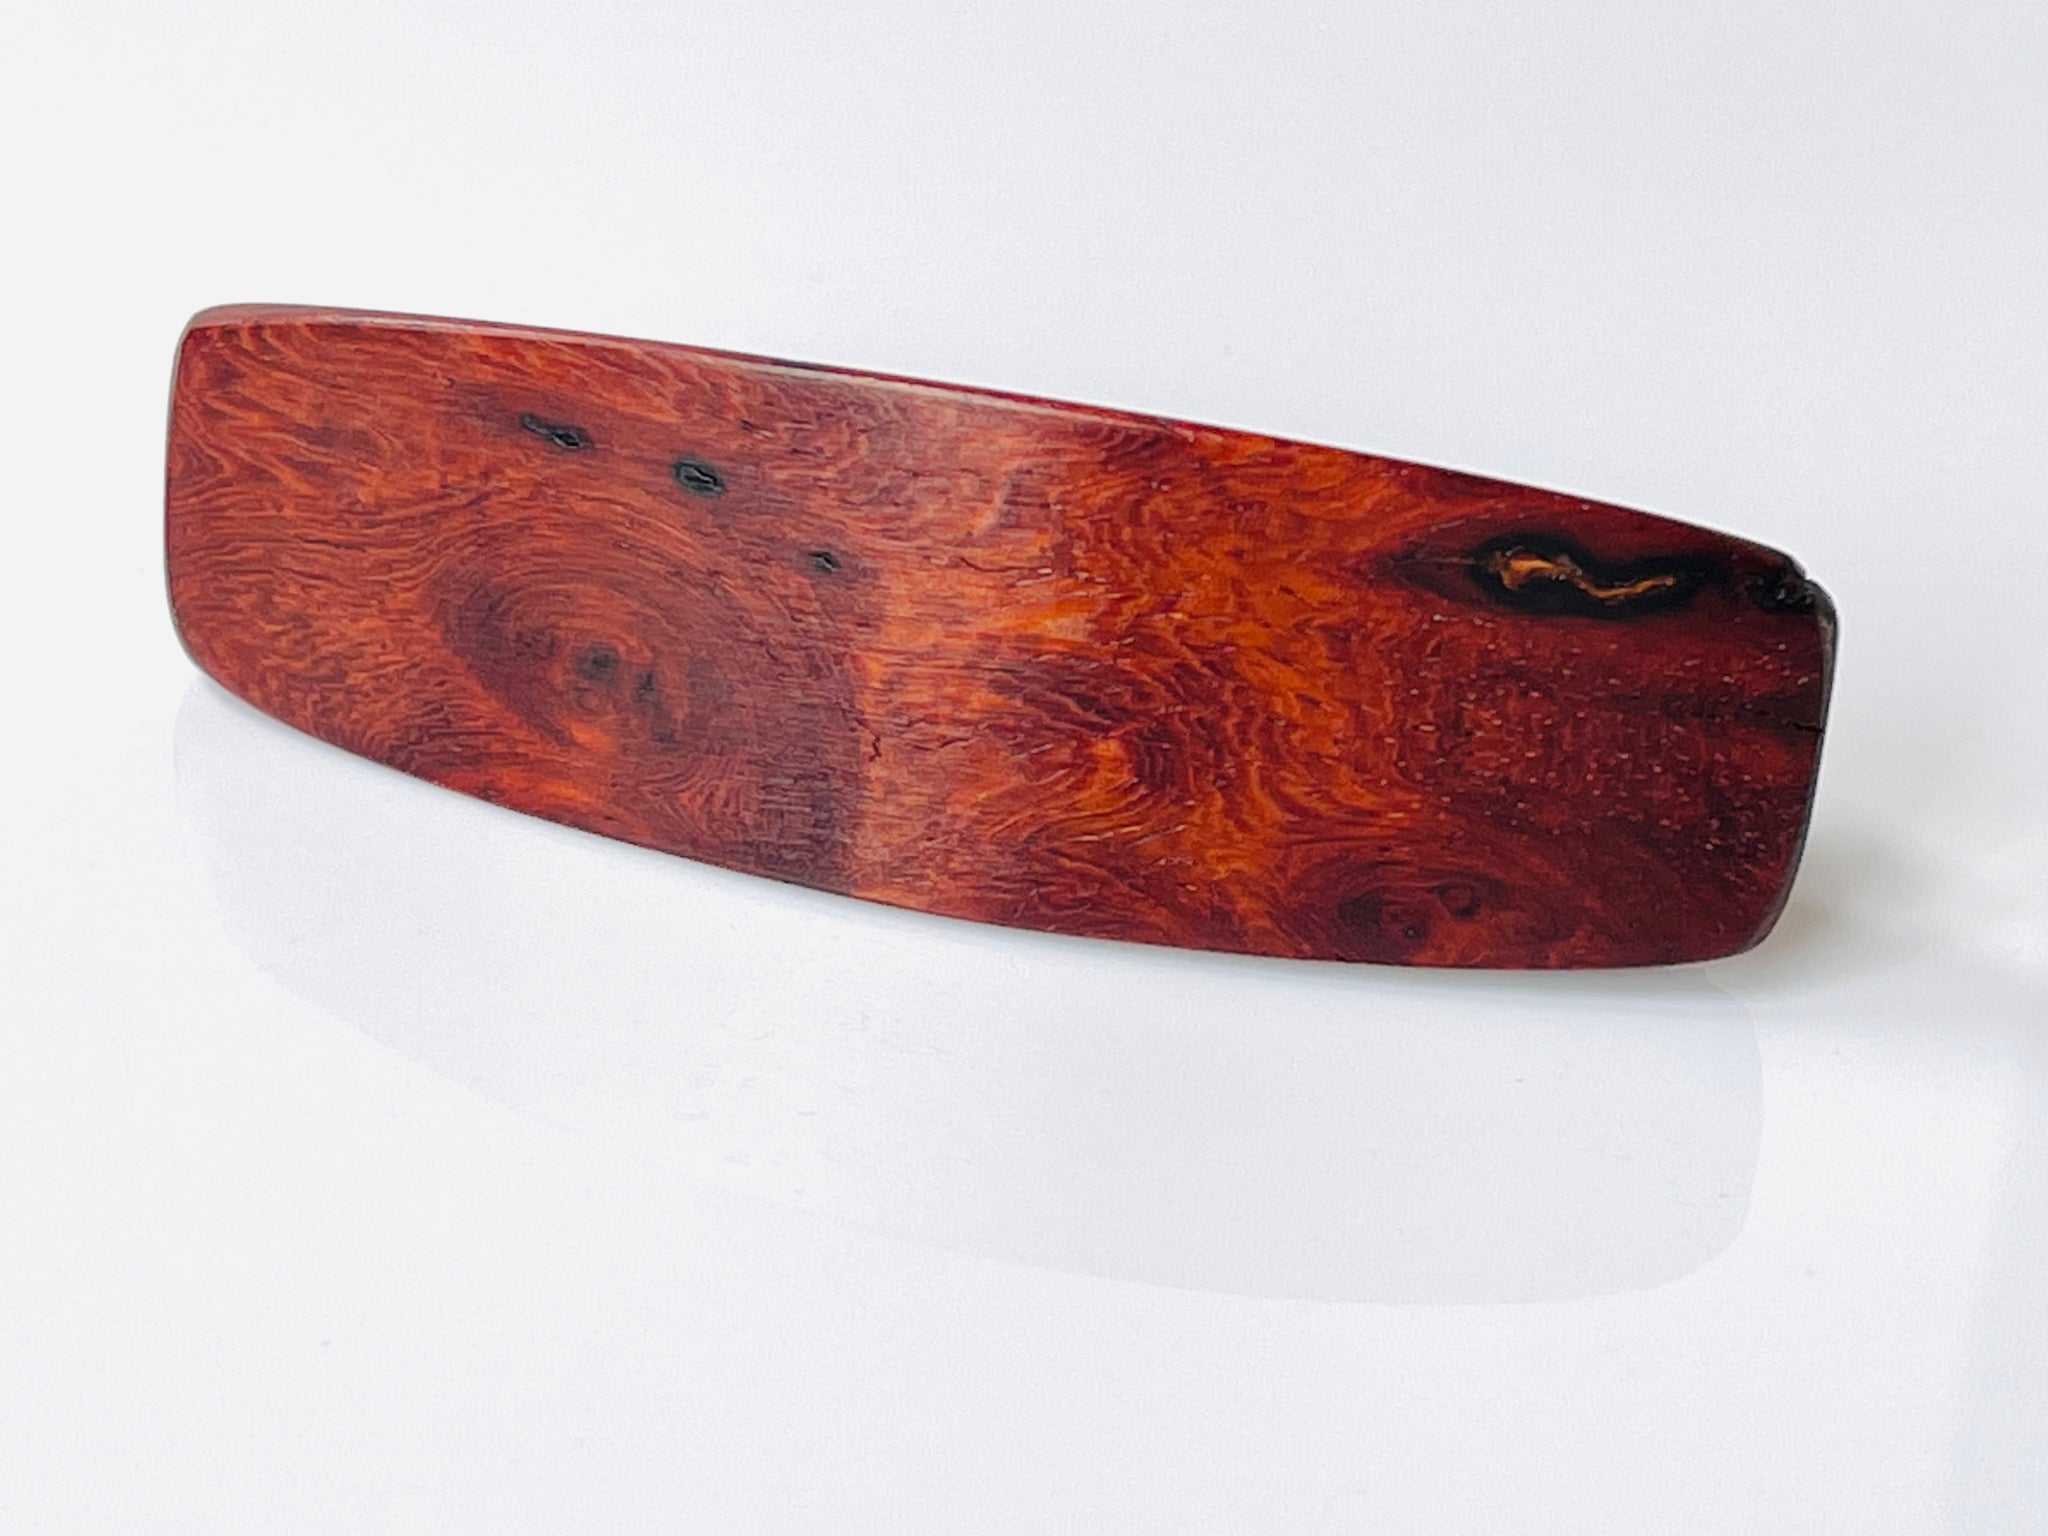 Burl Wood Is the Rare and Unique Wood Taking Over the Design World